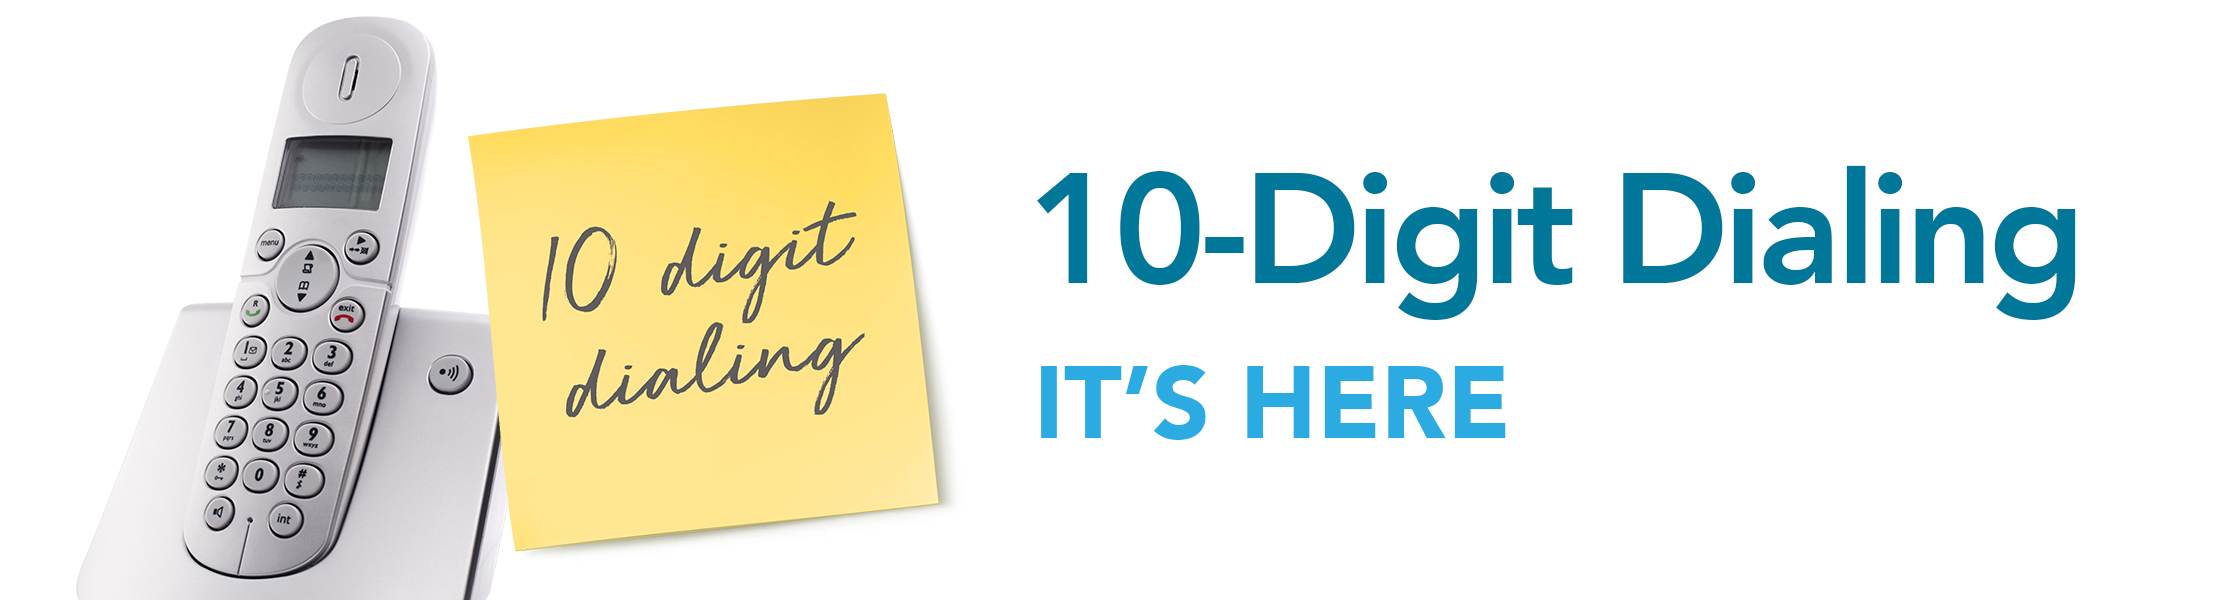 10-digit dialing is here